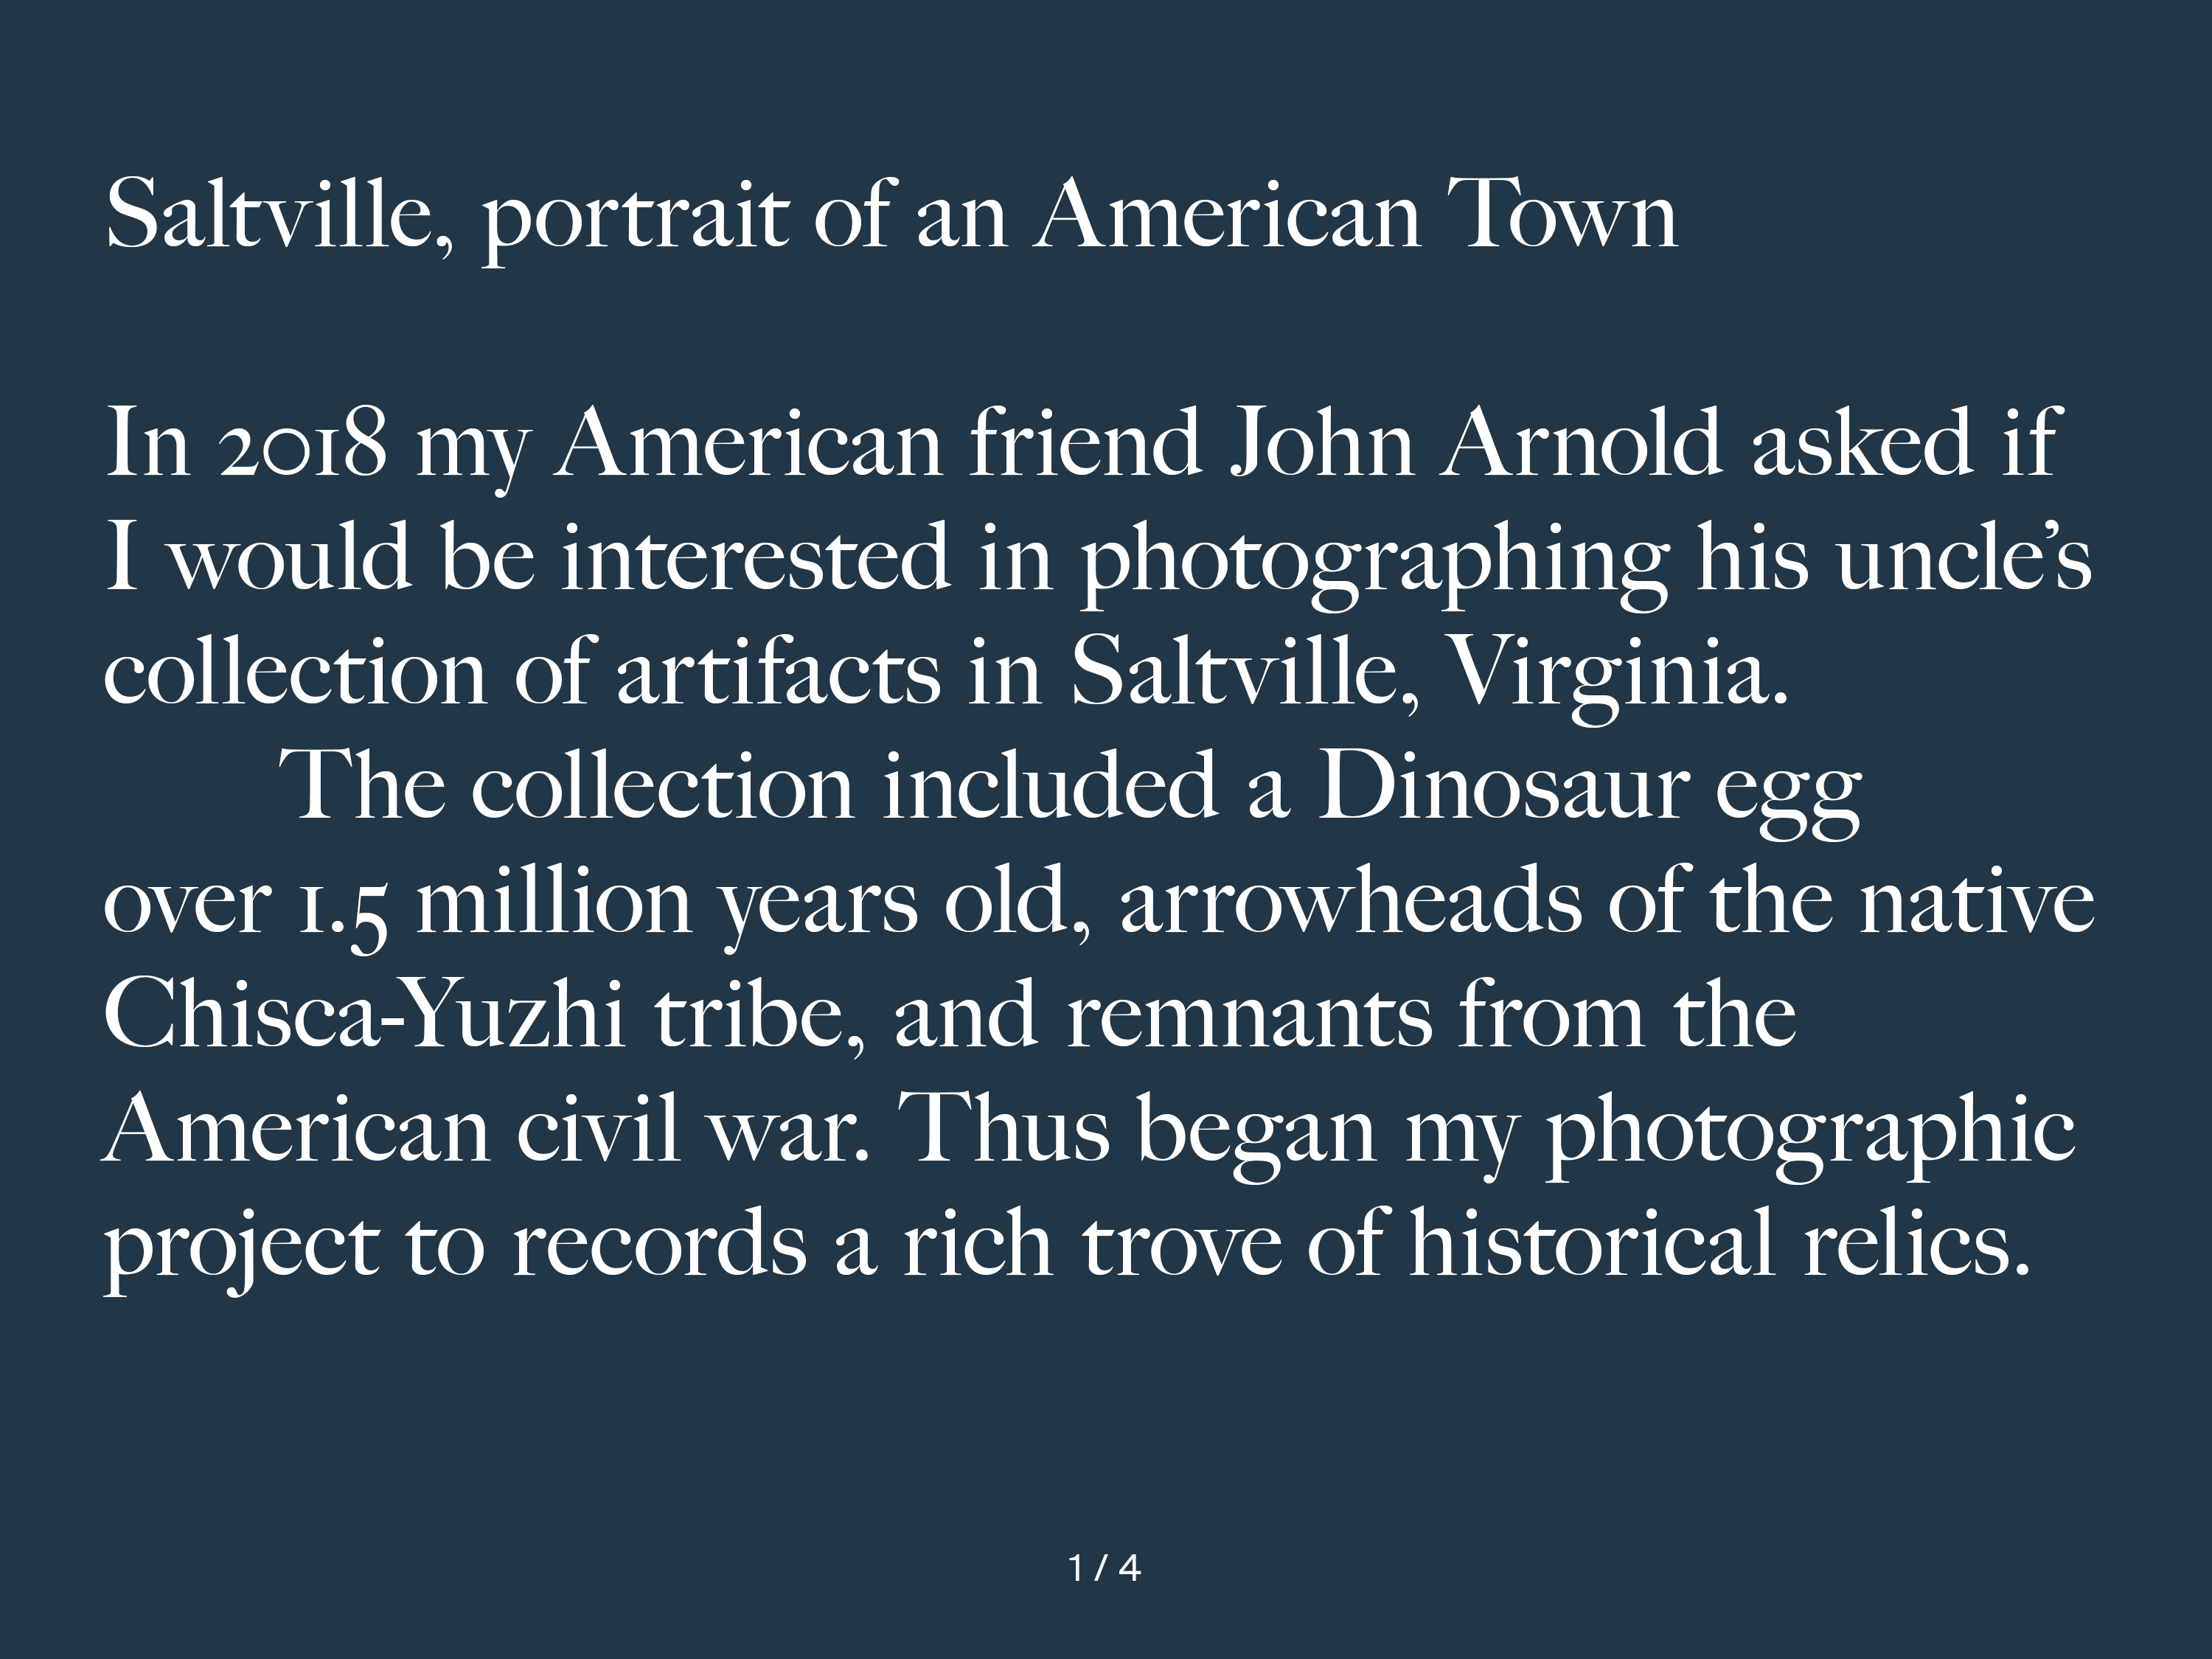 Saltville, portrait of an American Tow. In 2018 my American friend John Arnold asked if I would be interested in photographing his uncle’s collection of artifacts in Saltville, Virginia. The collection included a Dinosaur egg over 1.5 million years old, arrowheads of the native Chisca-Yuzhi tribe, and remnants from the American civil war. Thus began my photographic project to records a rich trove of historical relics.